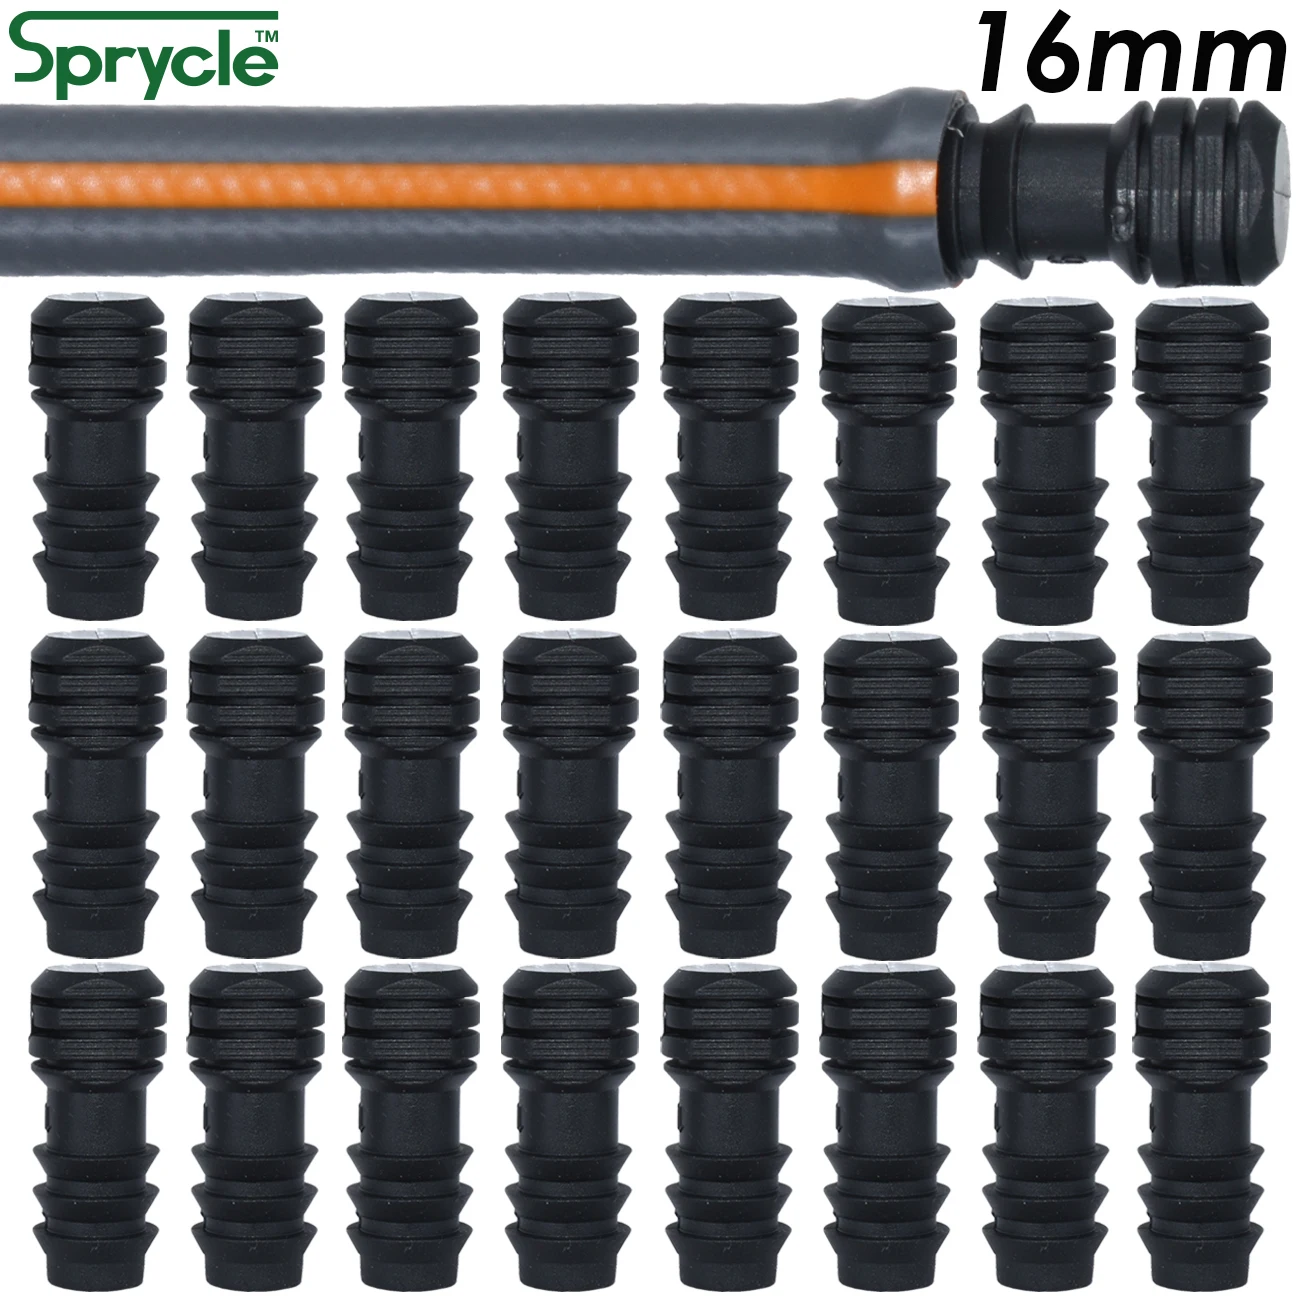 SPRYCLE 50PCS Garden 1/2'' Barbed End Plug Connector for 16mm PE PVC Hose Fittings Drip Irrigation Water Pipe Connector Repair